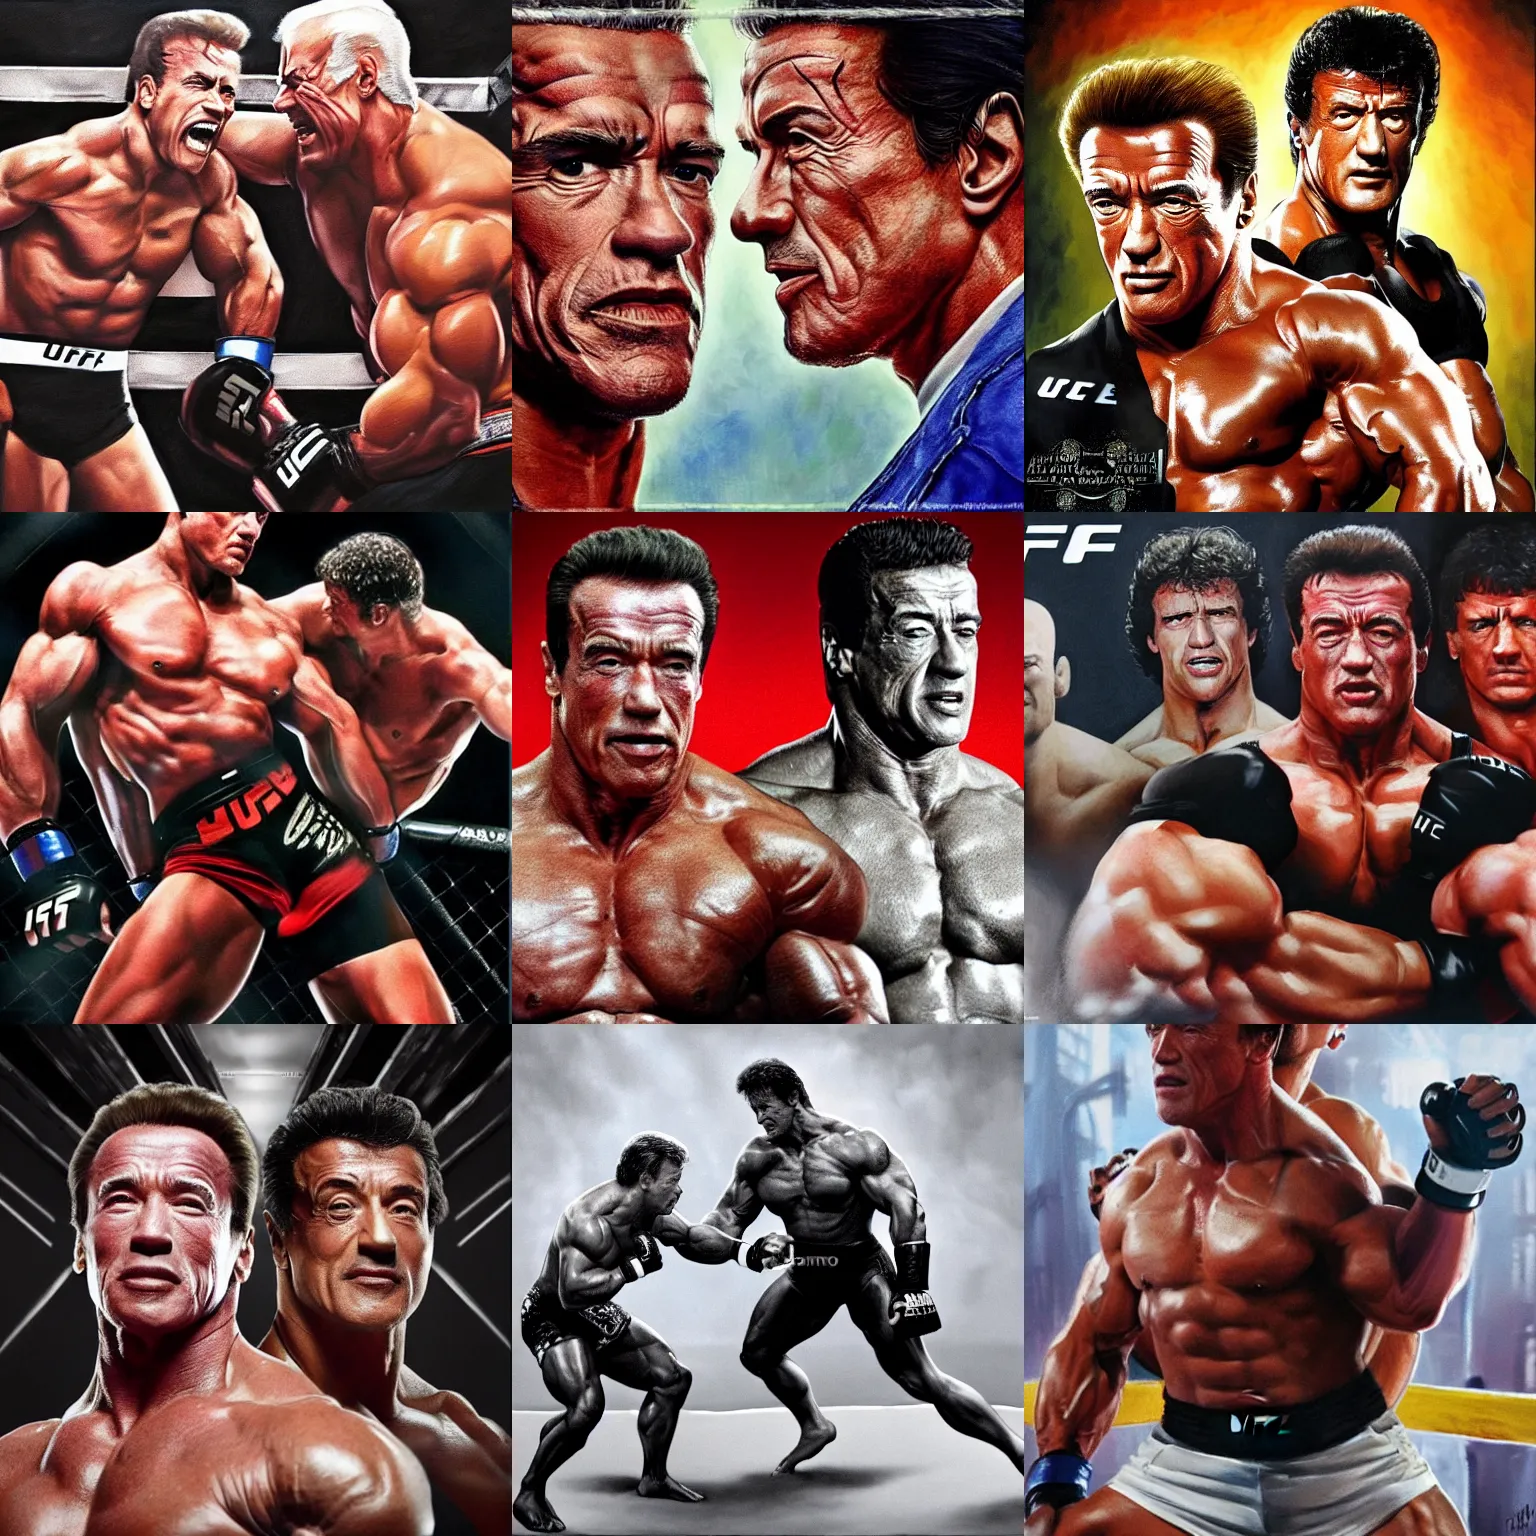 Prompt: Arnold Schwarzenegger and Sylvester Stallone in an UFC fight in octagon, artstation hall of fame gallery, editors choice, #1 digital painting of all time, most beautiful image ever created, emotionally evocative, greatest art ever made, lifetime achievement magnum opus masterpiece, the most amazing breathtaking image with the deepest message ever painted, a thing of beauty beyond imagination or words, 4k, highly detailed, cinematic lighting